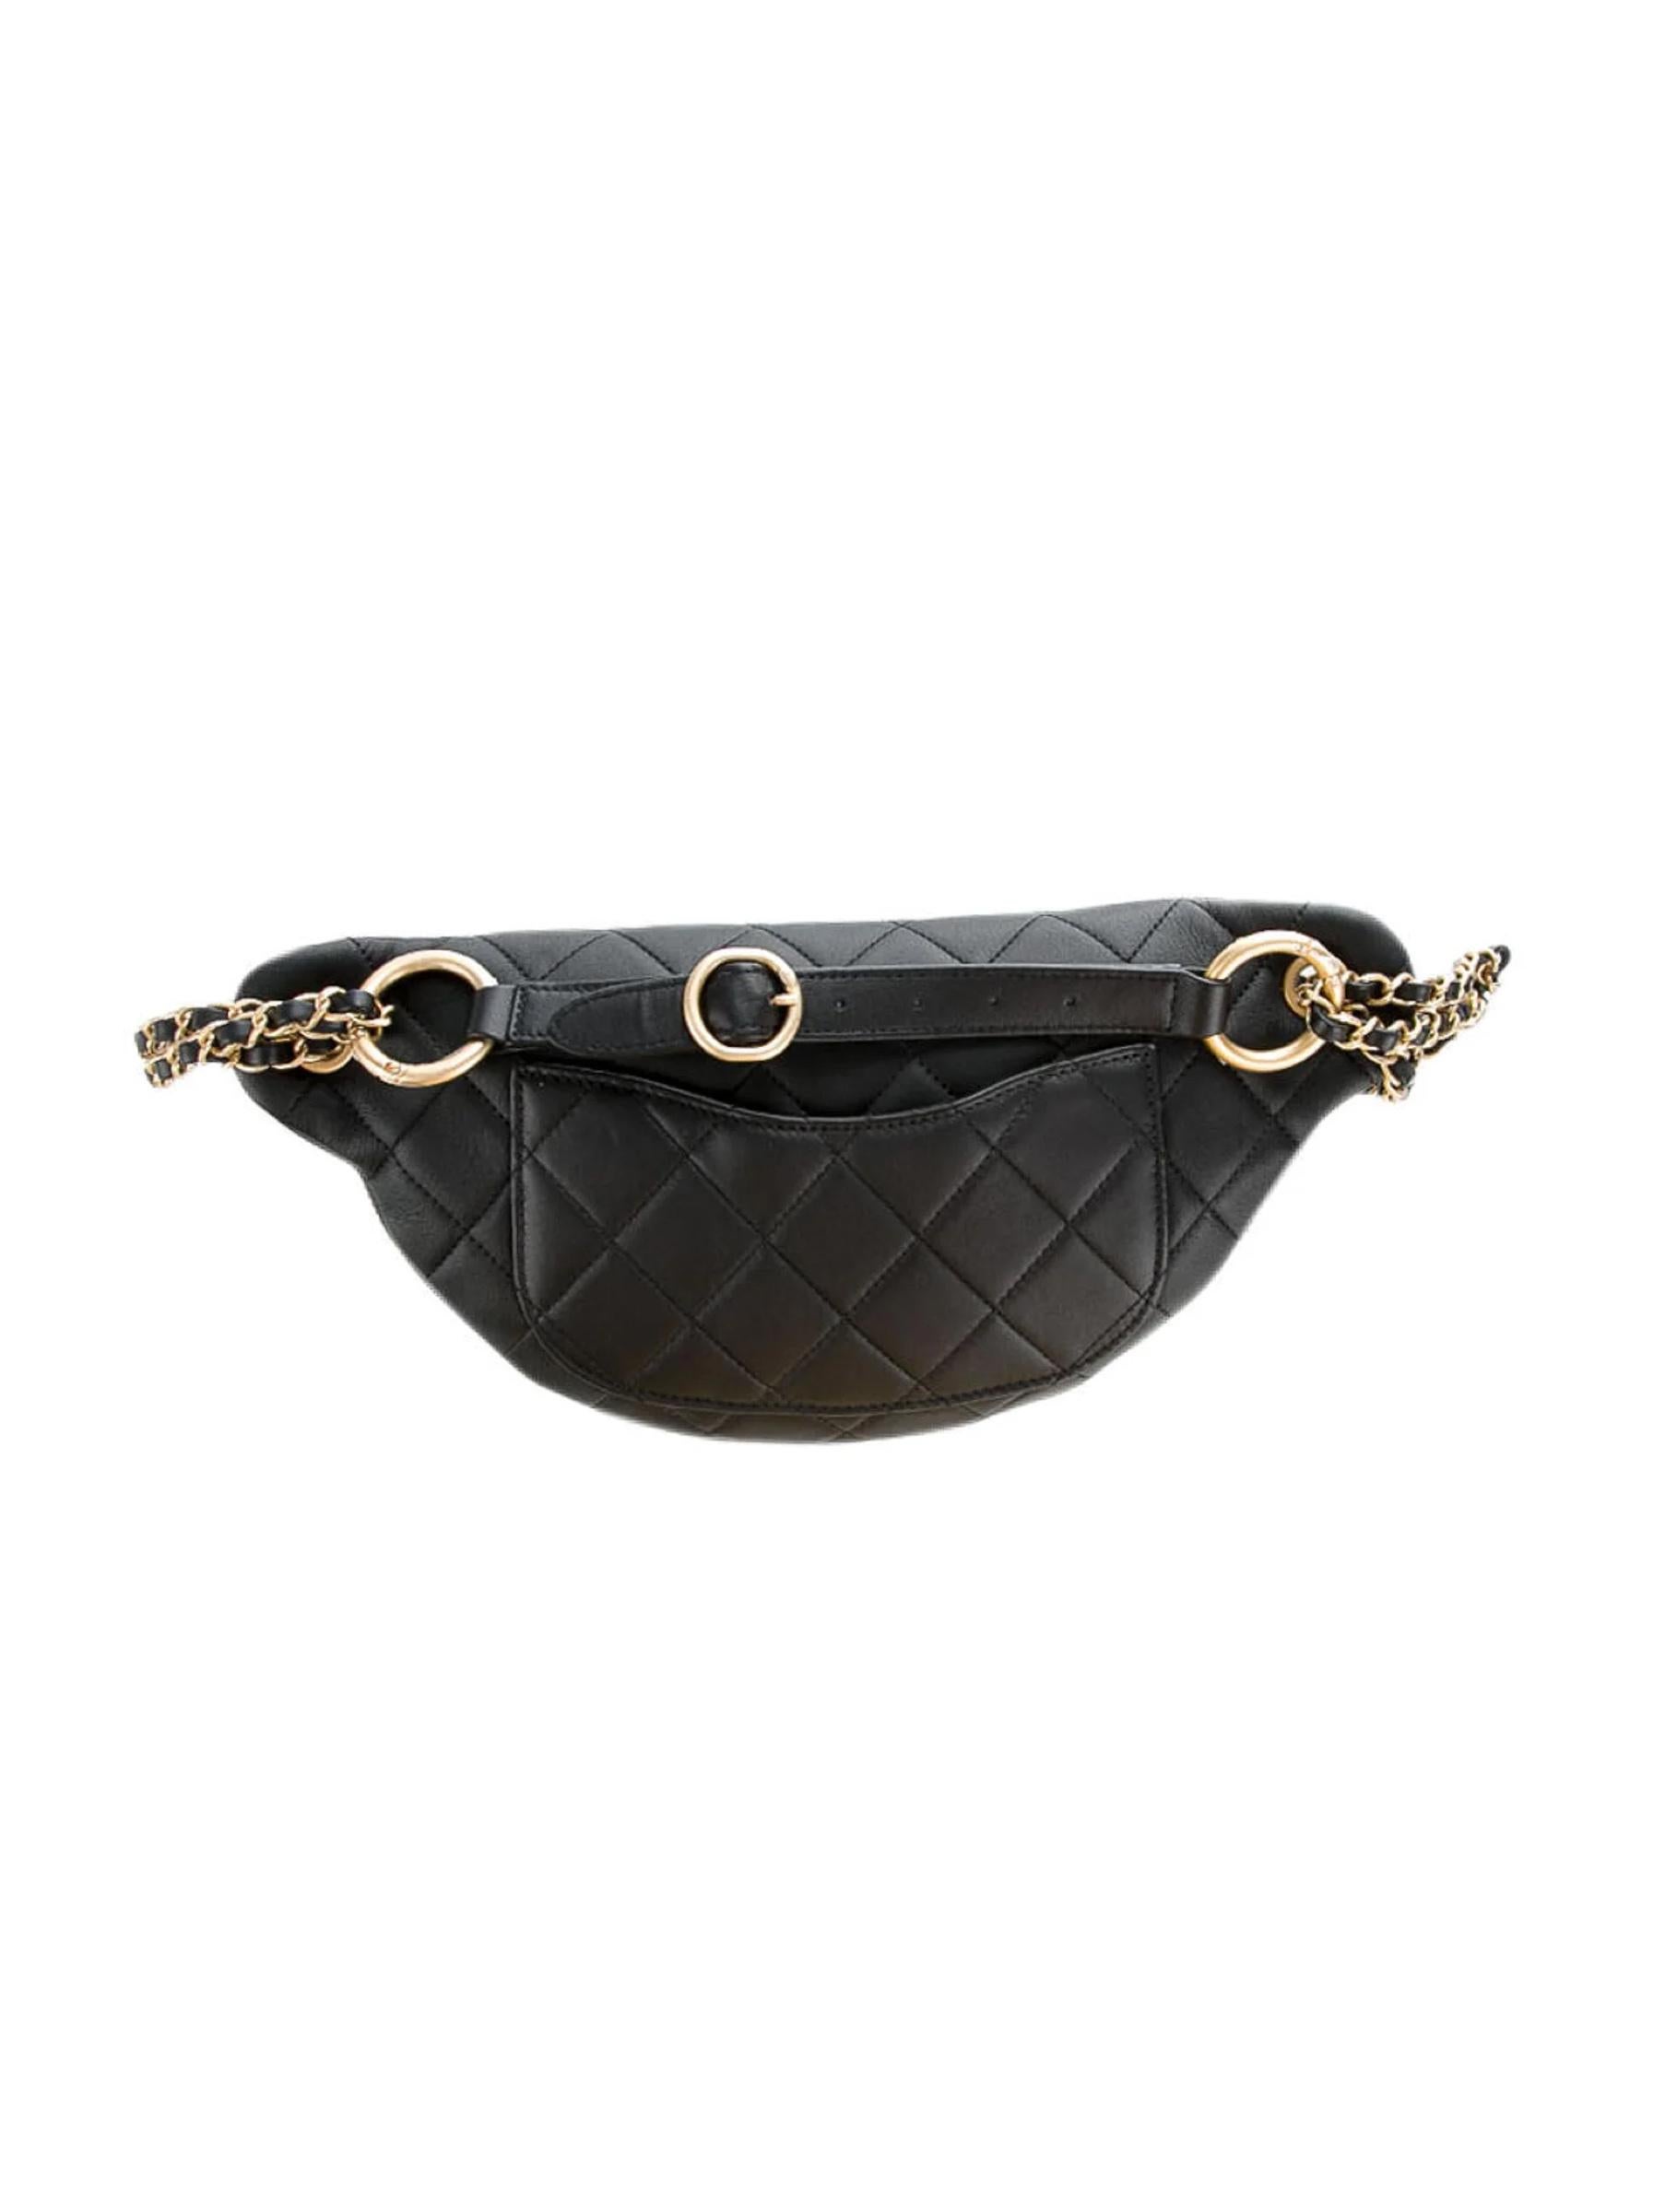 Released for the Pre-Fall 2019 Collection. This bag is made with supple lambskin leather in black with diamond quilting. Features zip closure at the top, a zipper pull adorned with a CC Charm, a  gold toned chain strap interlaced with leather to